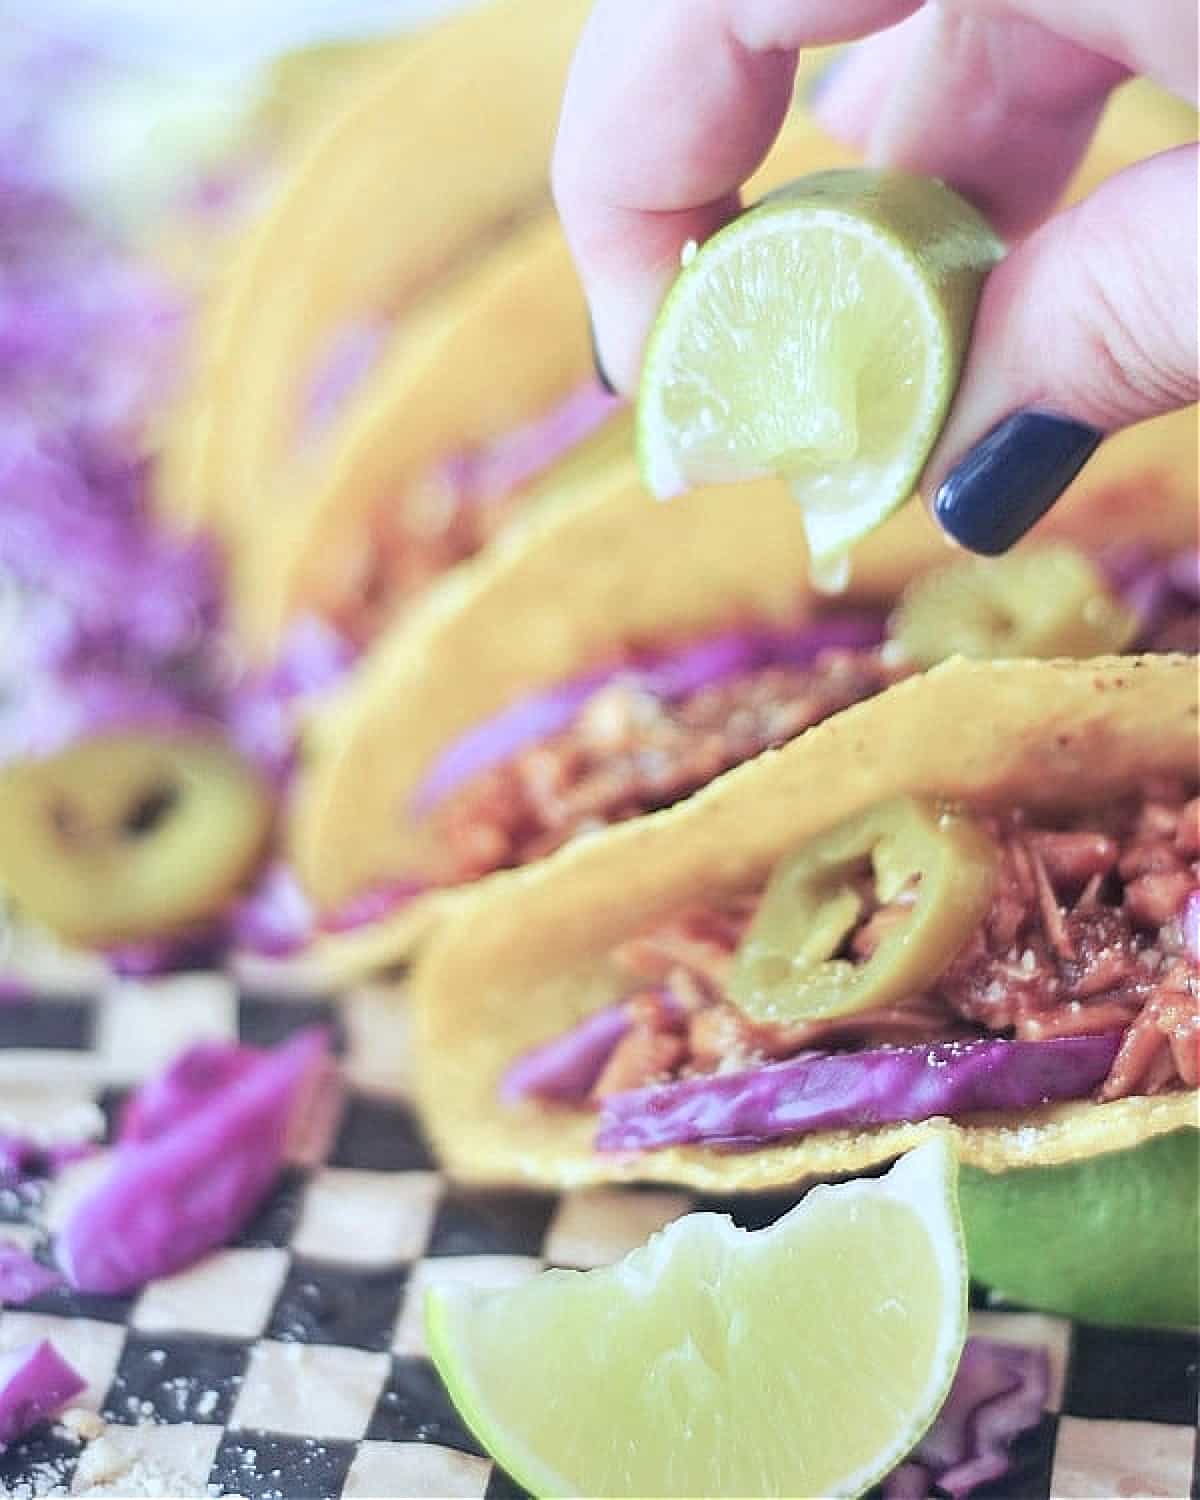 A hand squeezing a lime over BBQ pulled porcini tacos on black and white checkered paper.